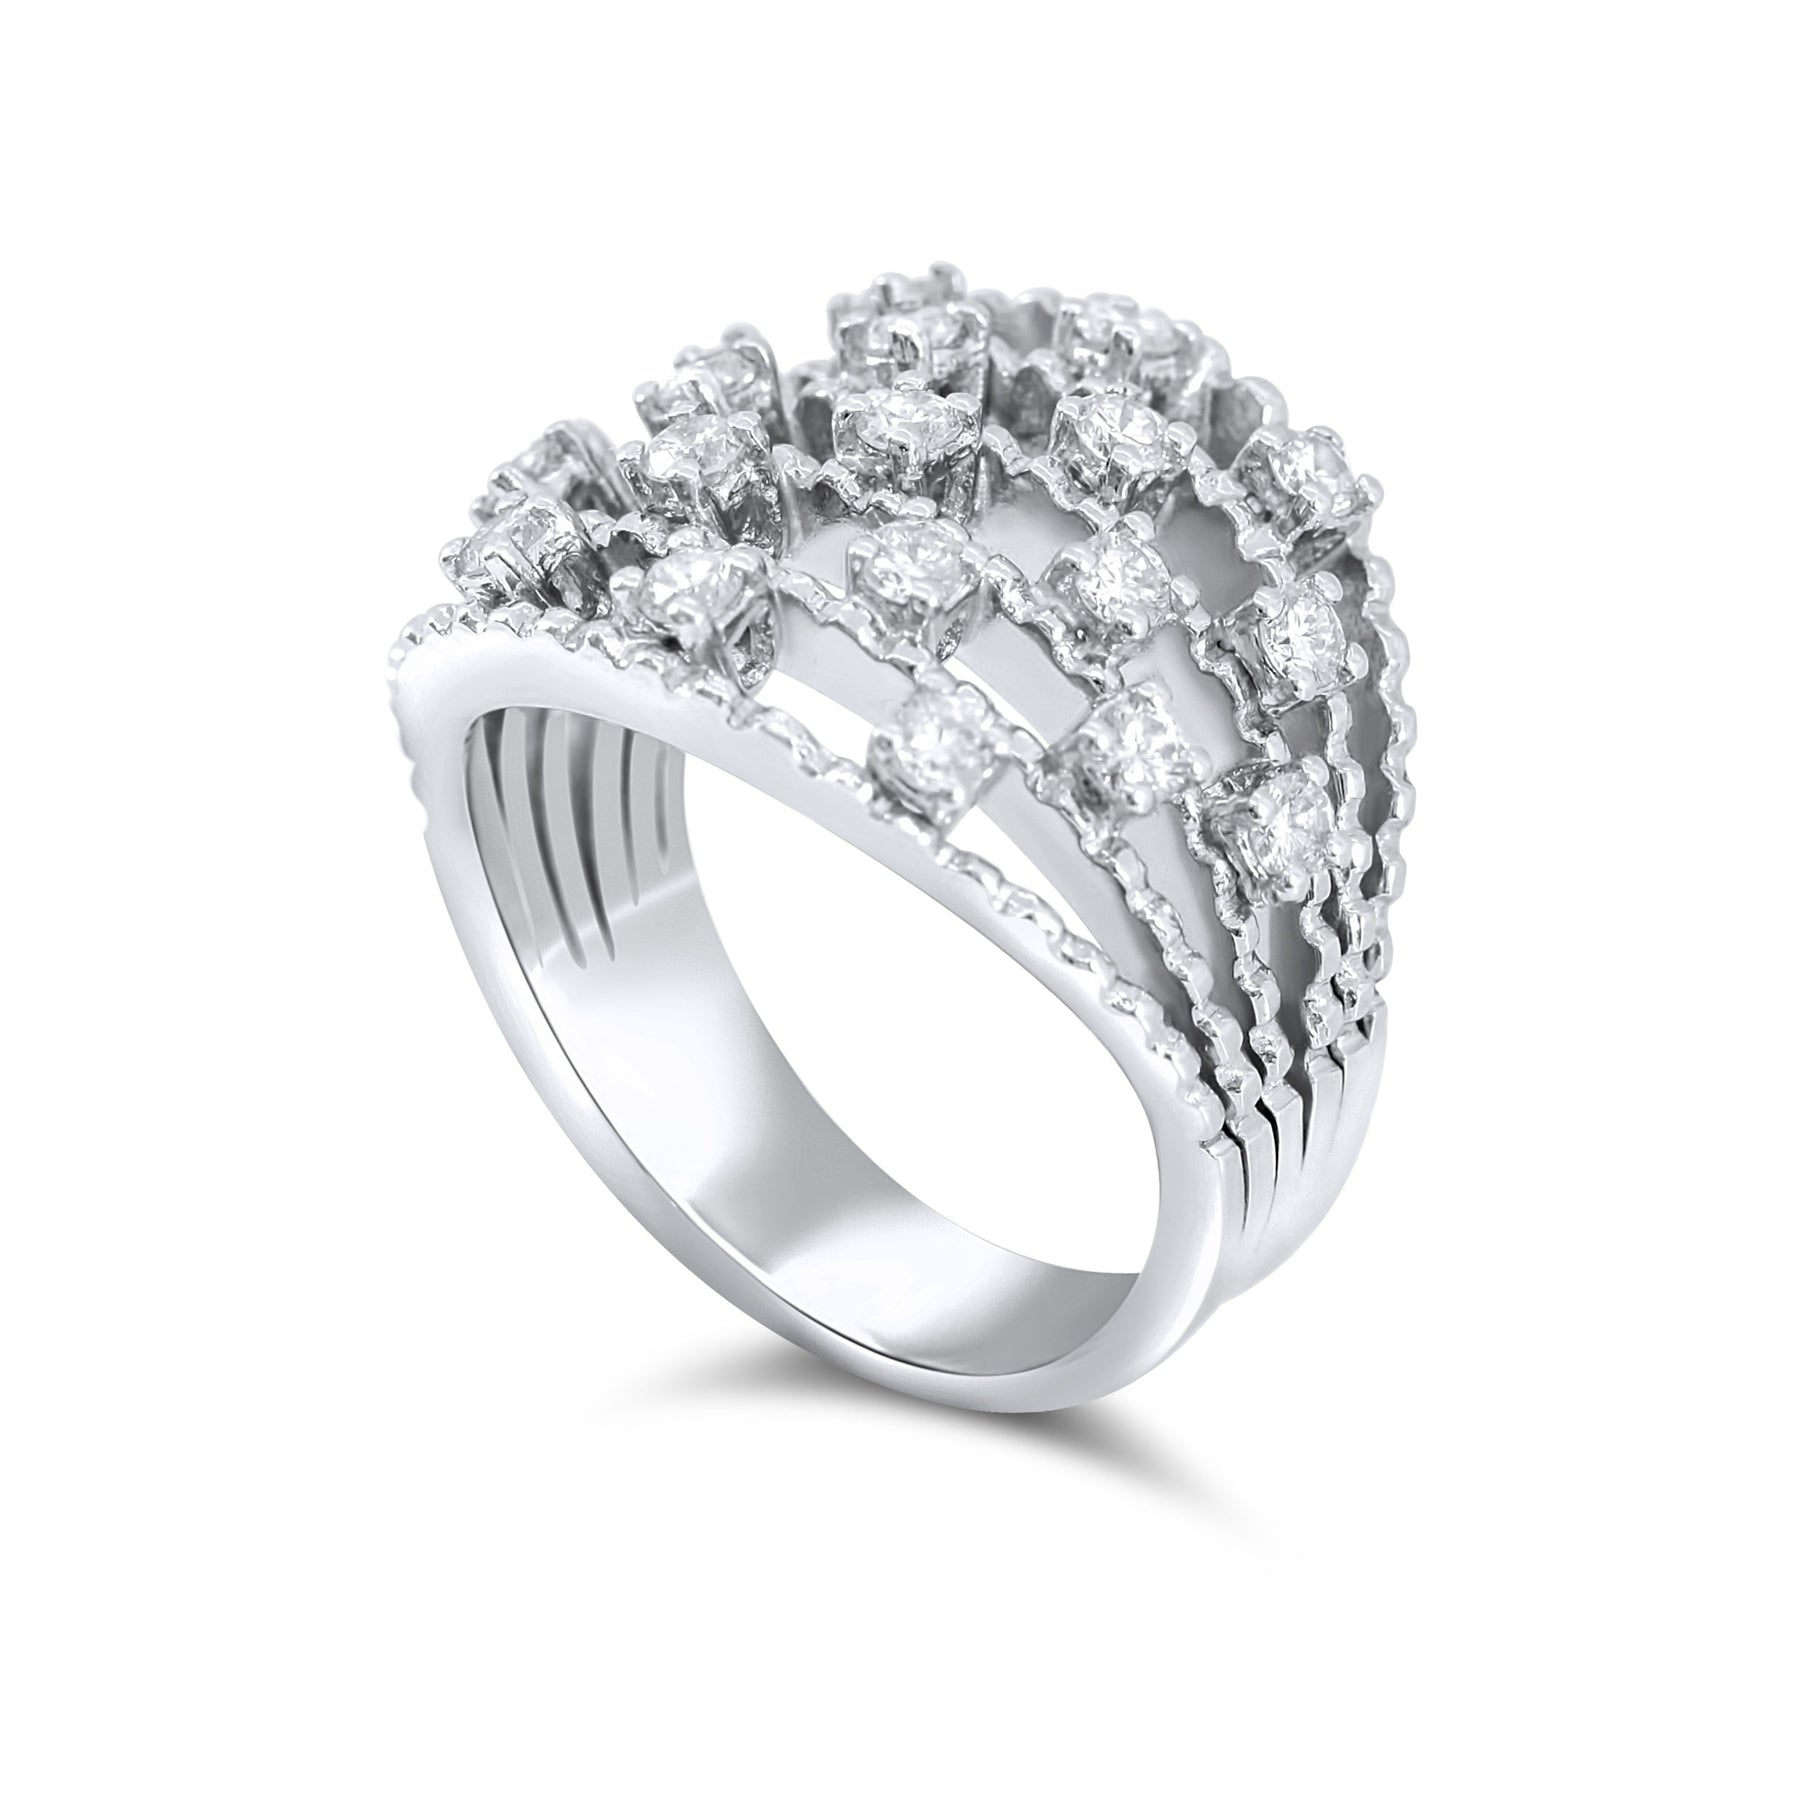 Multi Row Cocktail Ring